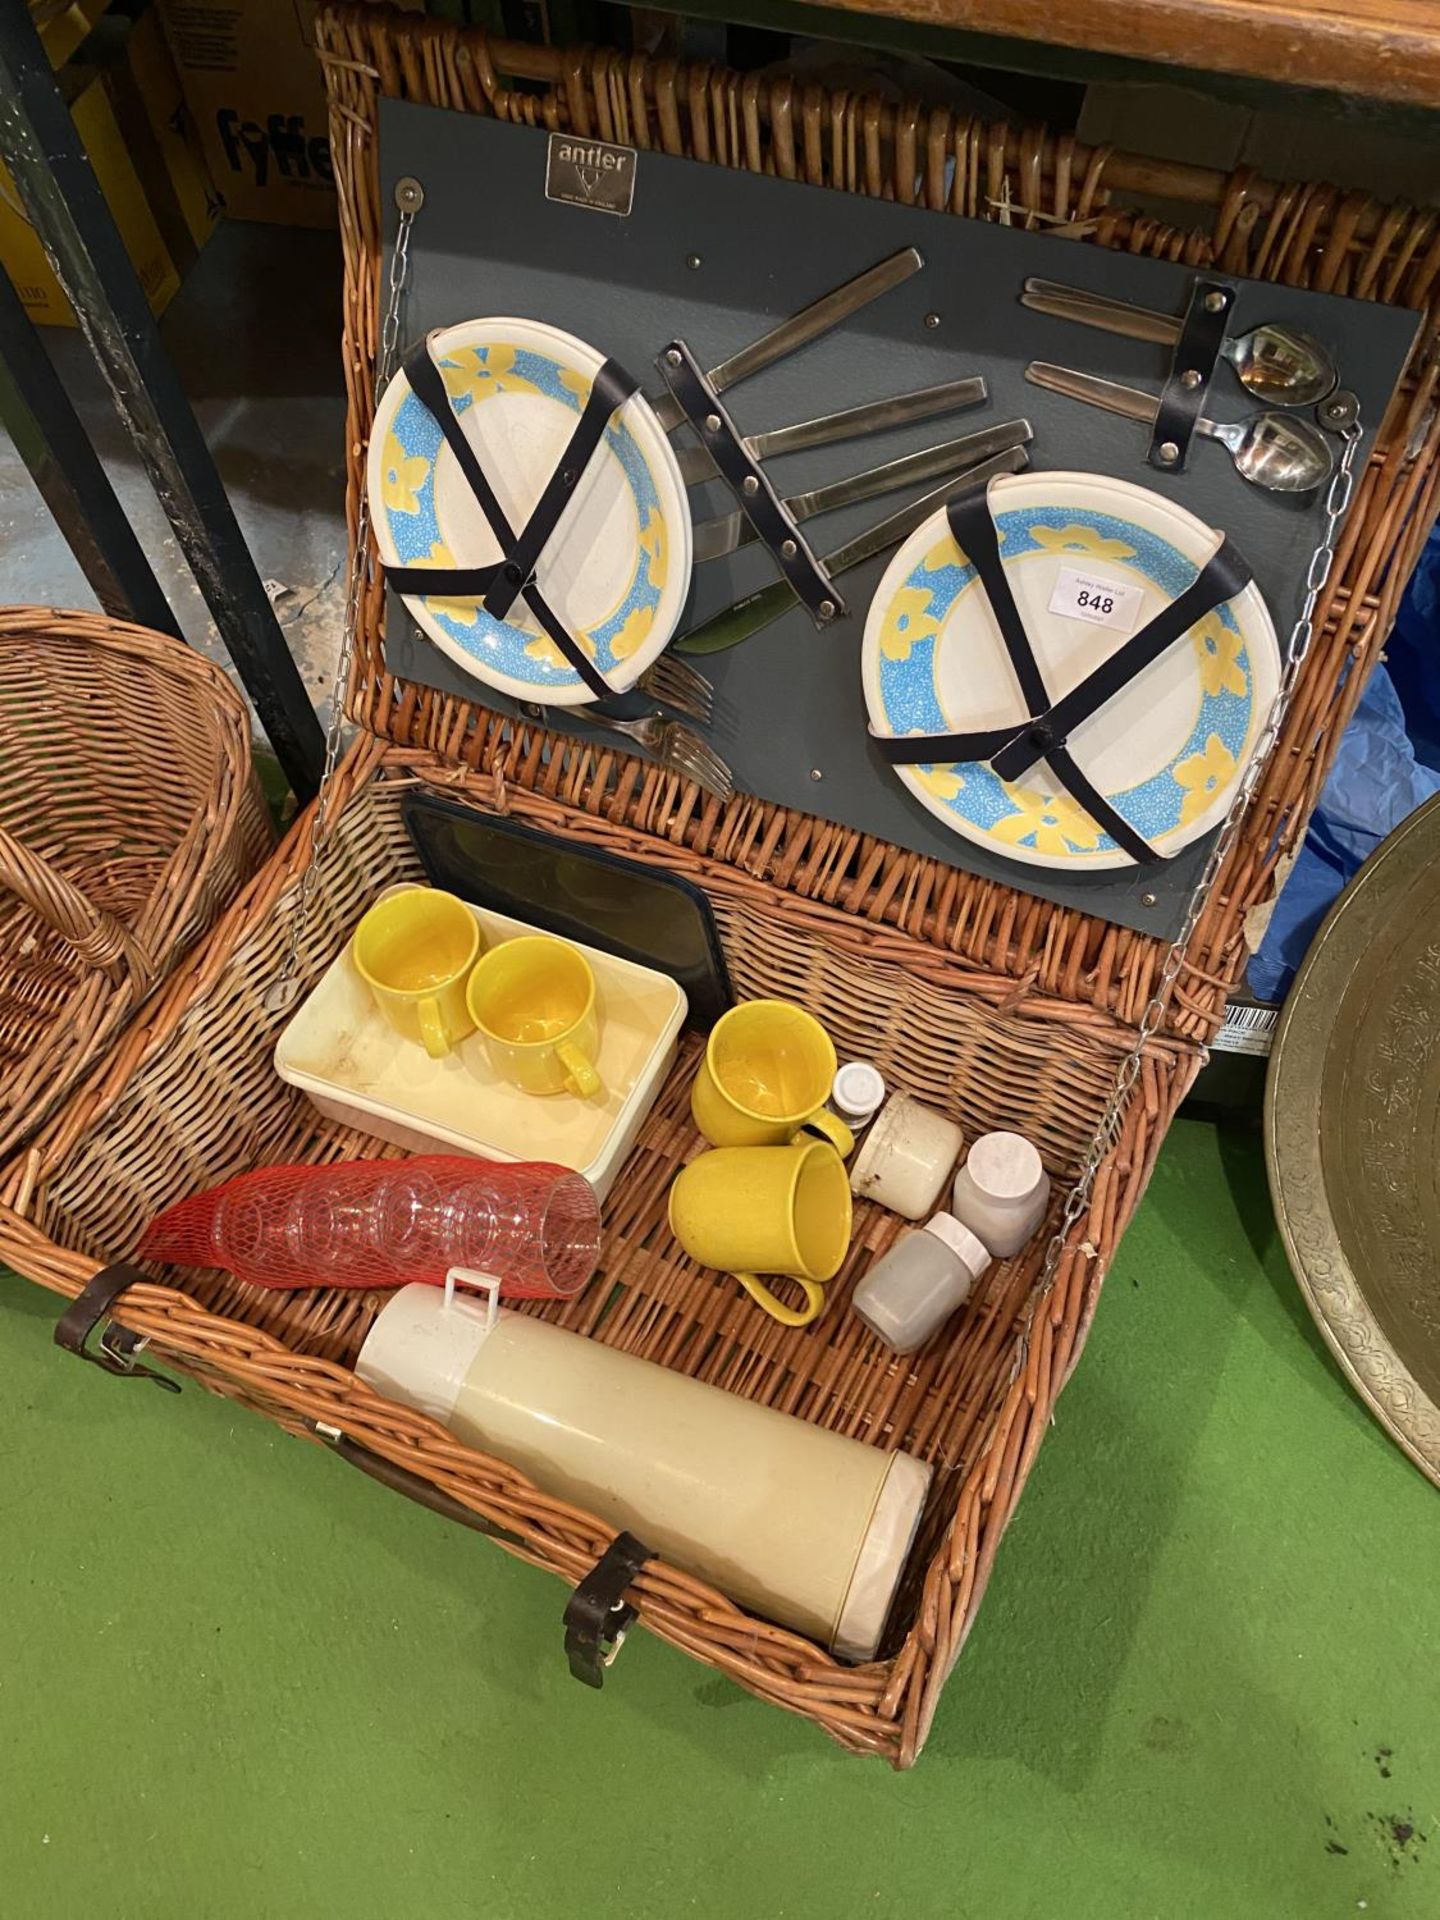 AN ANTLER PICNIC HAMPER TO INCLUDE A FOUR PERSON SET OF PLATES, CUTLERY, MUGS AND DRINKING GLASSES - Image 2 of 3